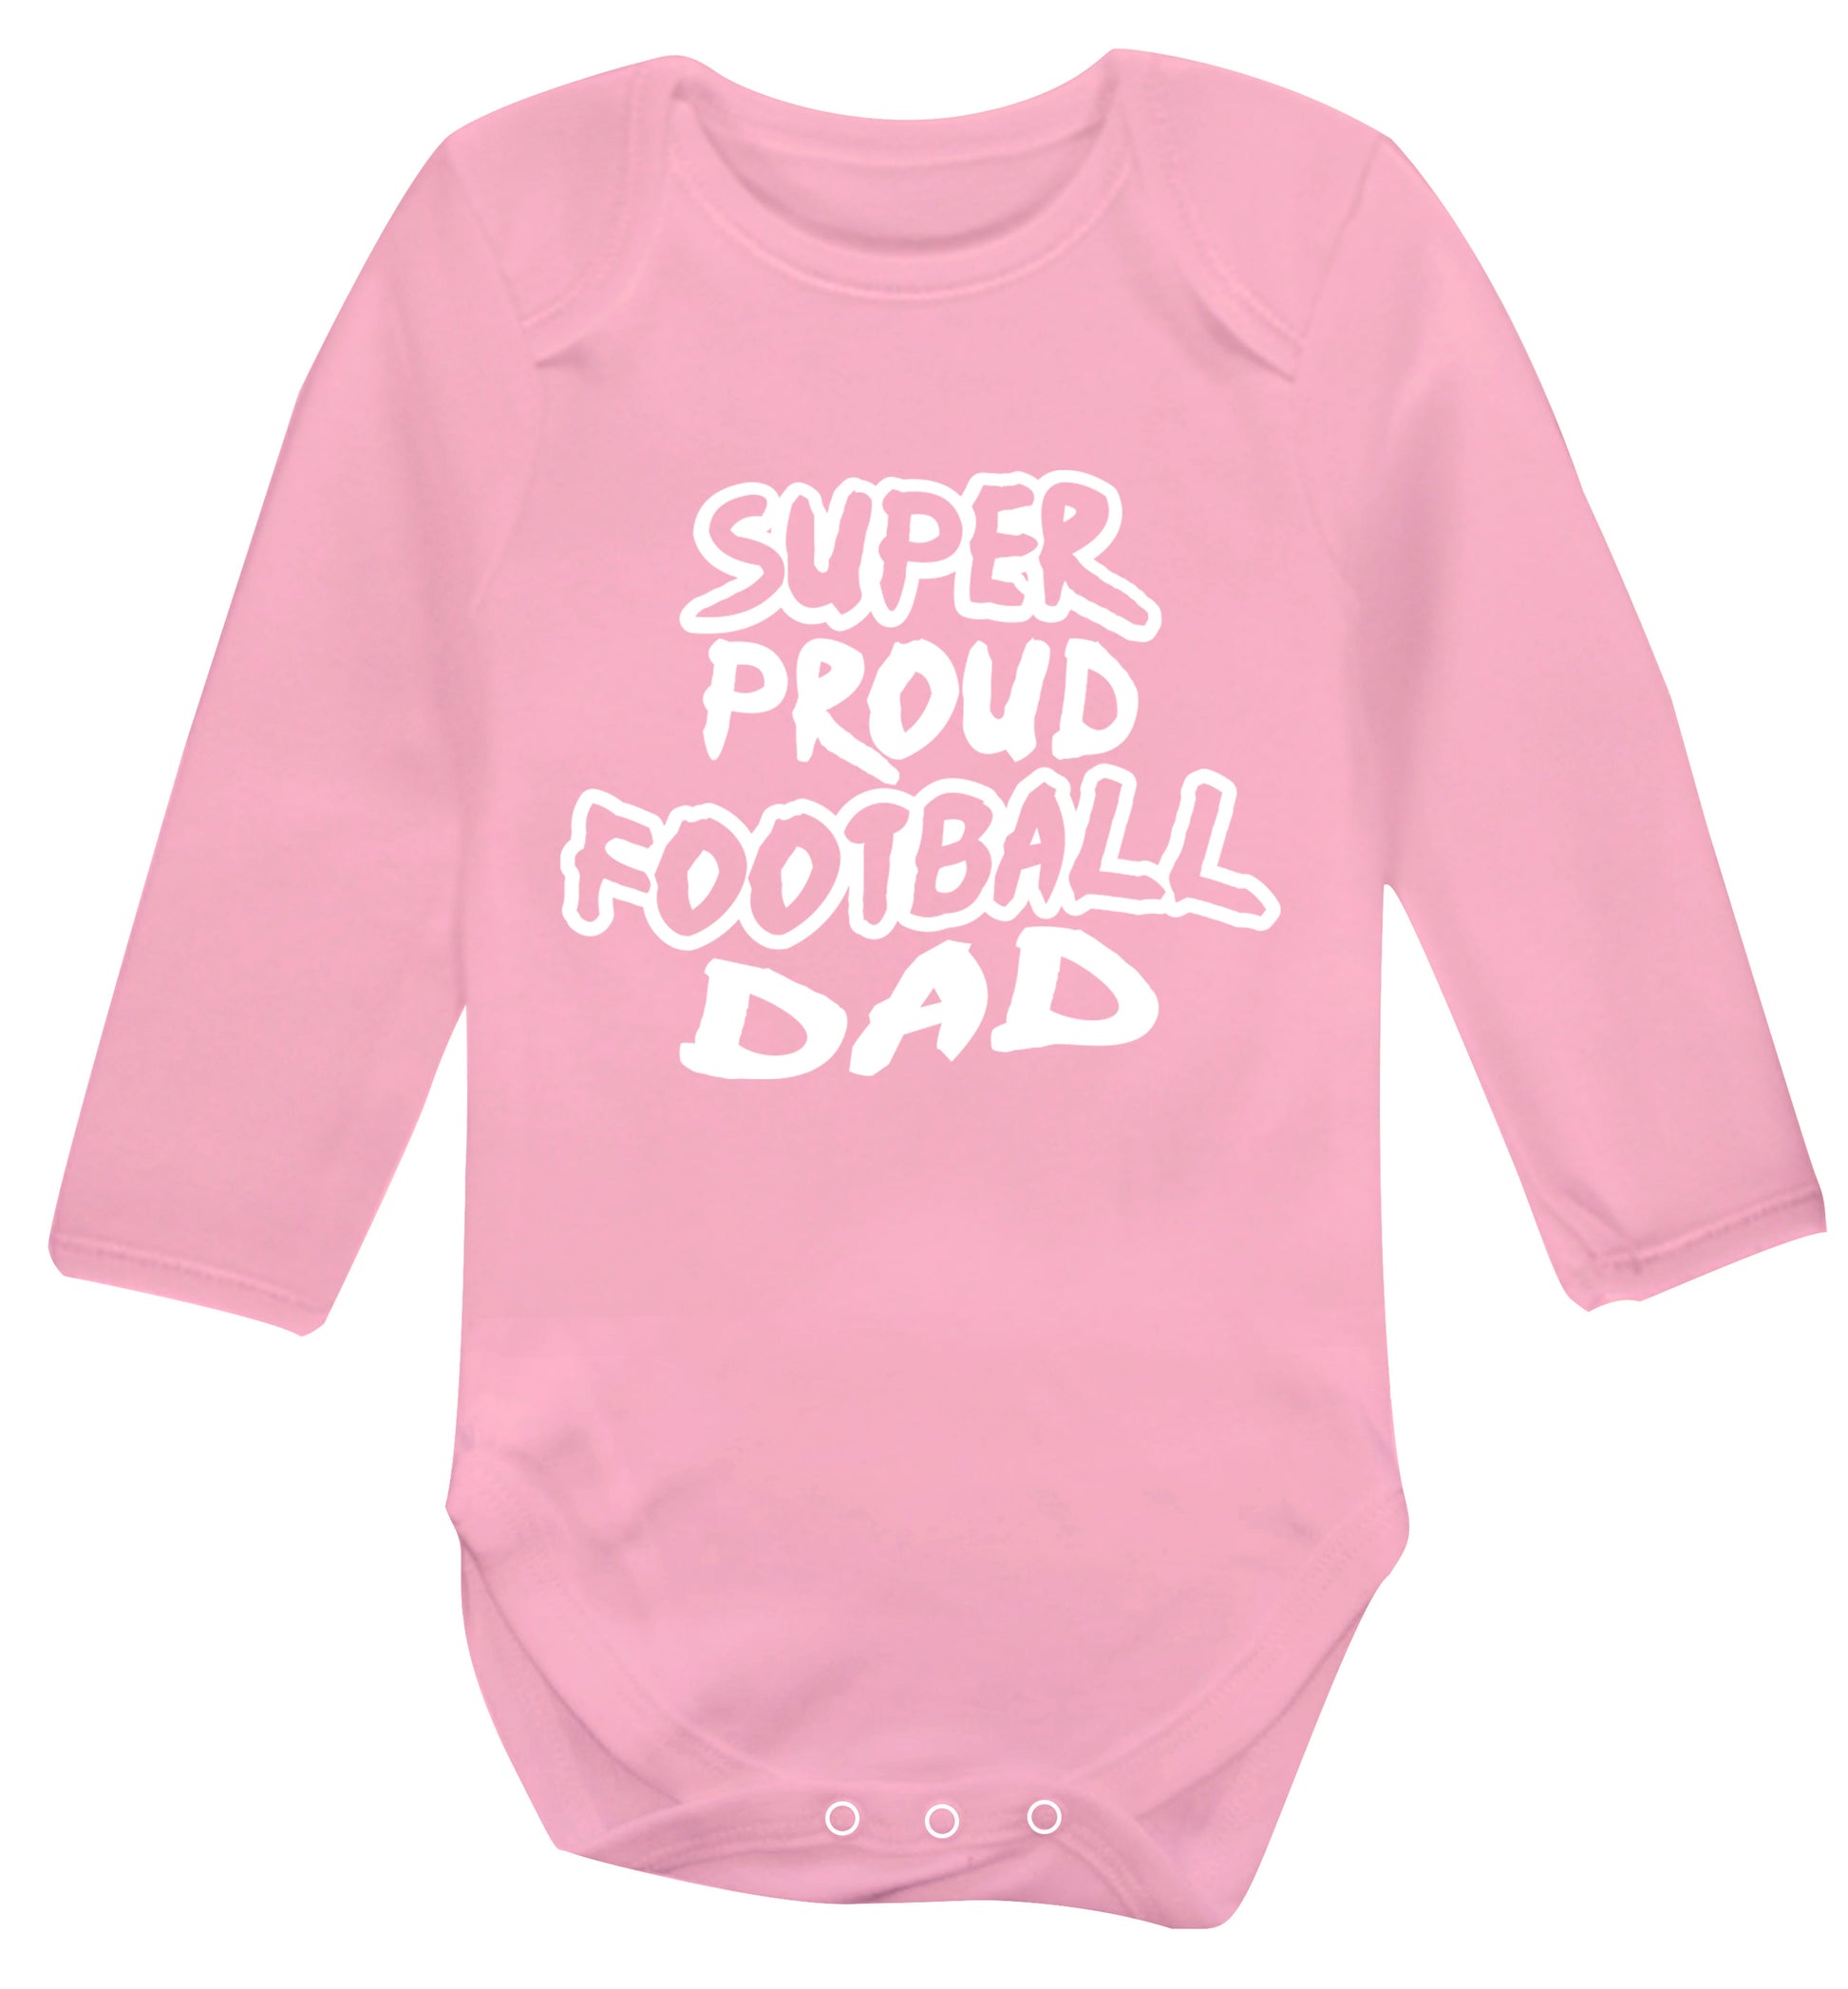 Super proud football dad Baby Vest long sleeved pale pink 6-12 months